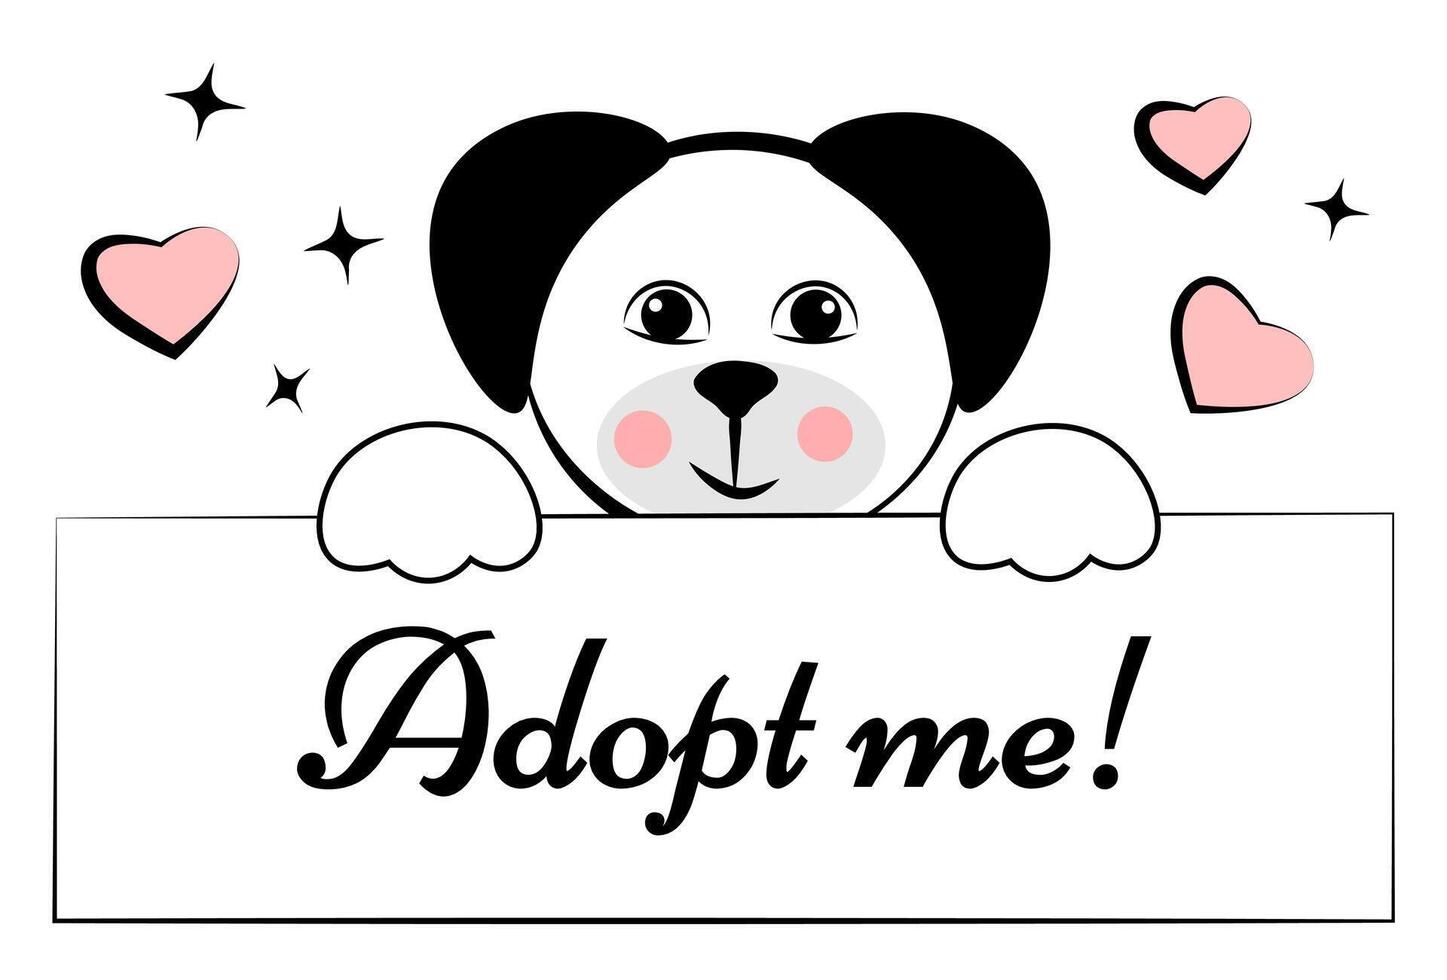 Adopt me. Dog with poster. Doodle. Adoption vector